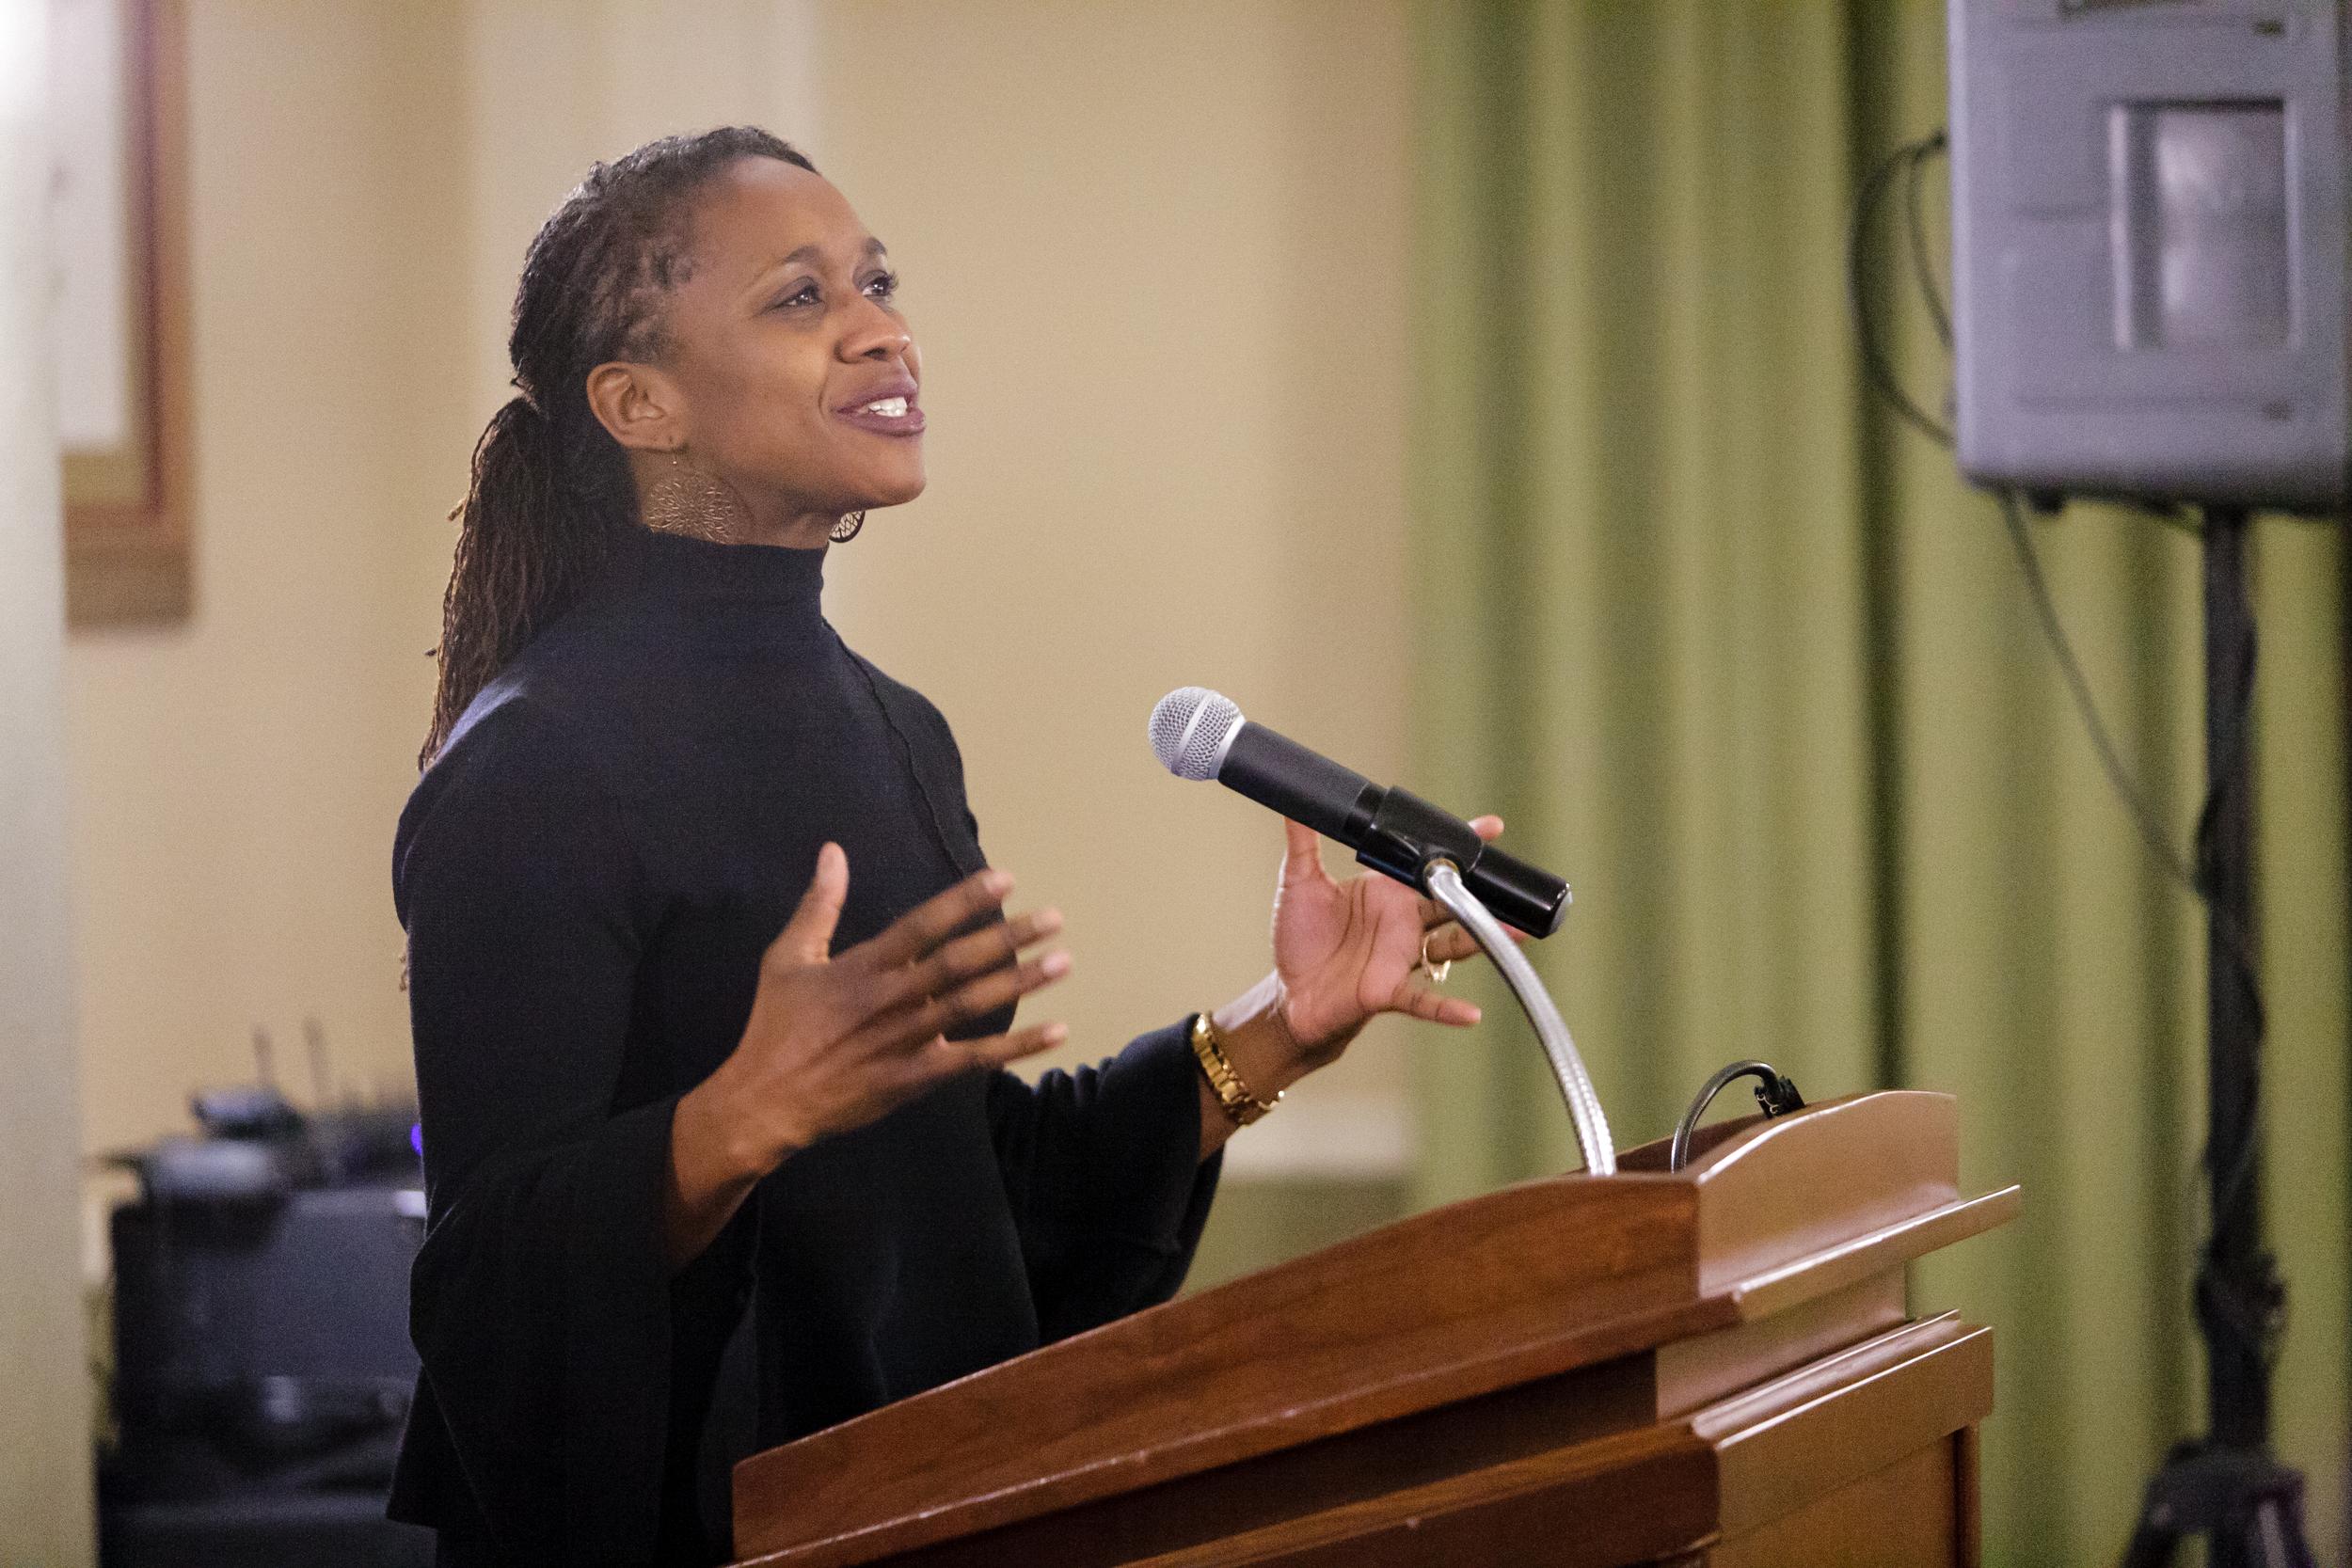 A black woman in a black sweater speaks behind a lectern while simultaneously using her hands to gesture effectively